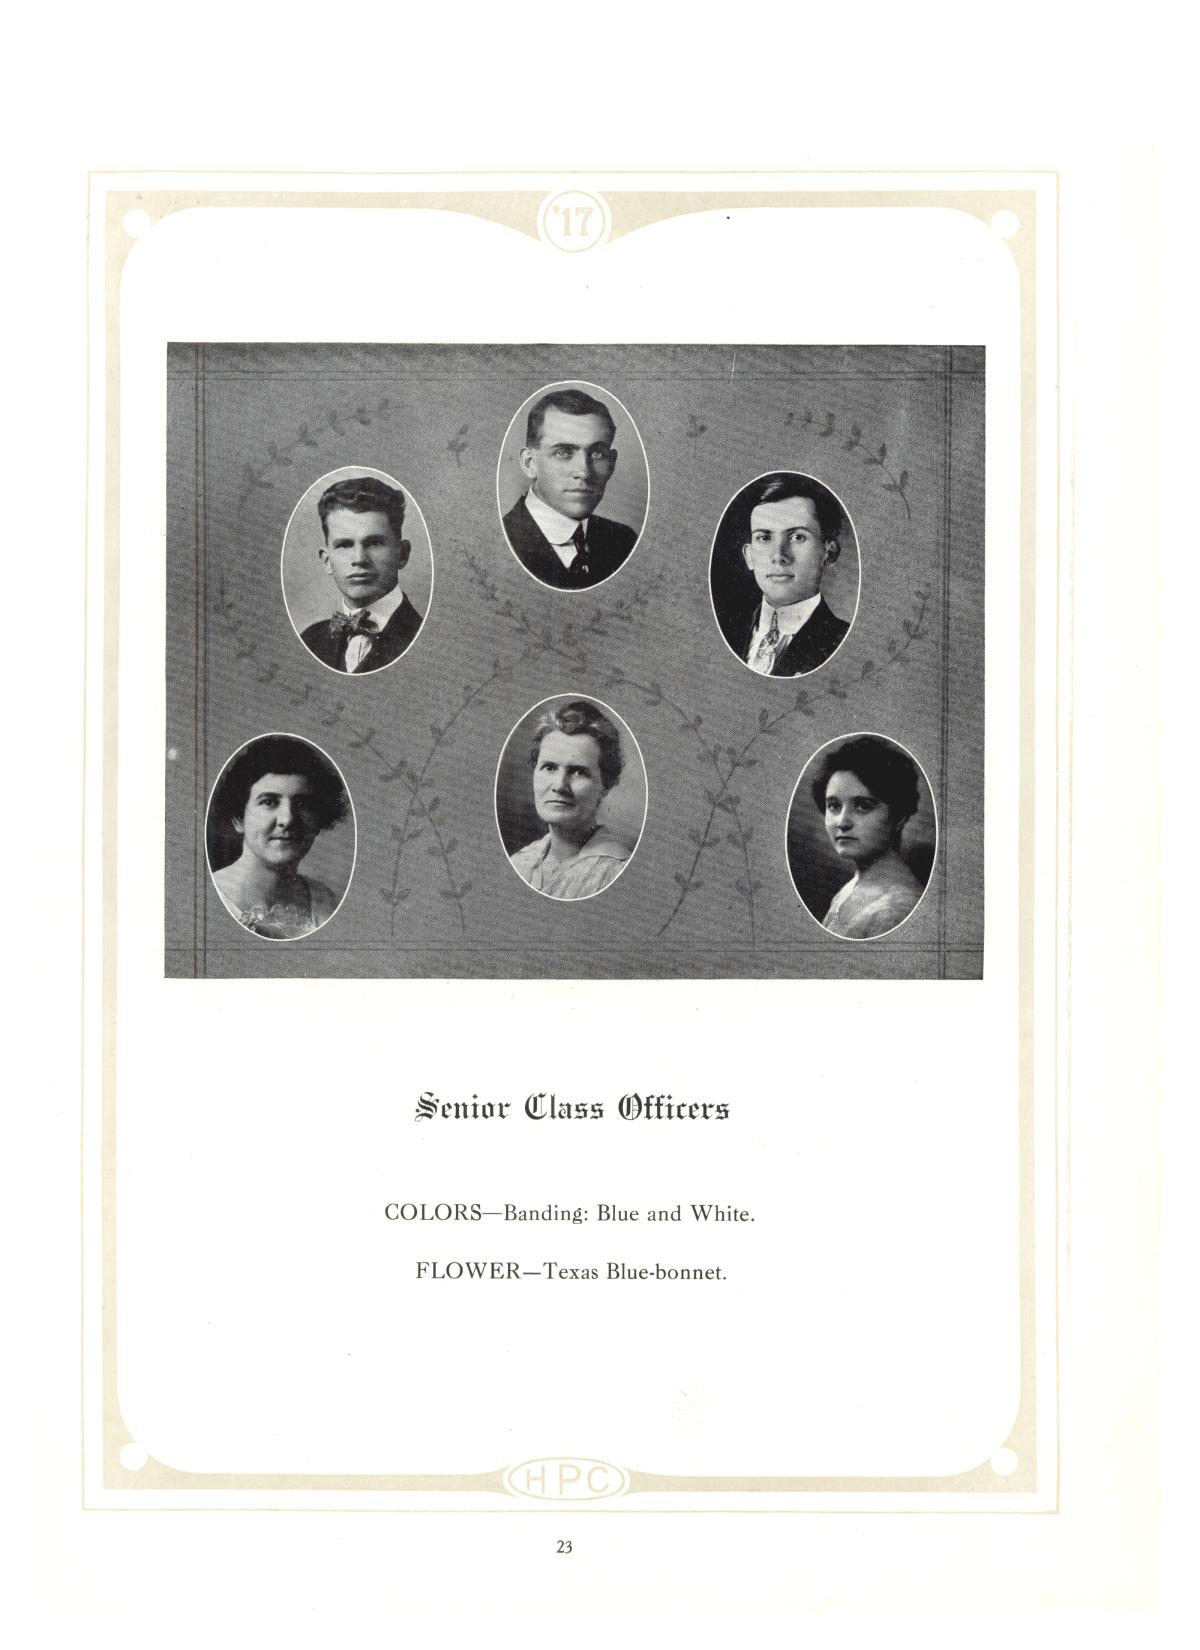 The Lasso, Yearbook of Howard Payne College, 1917
                                                
                                                    23
                                                